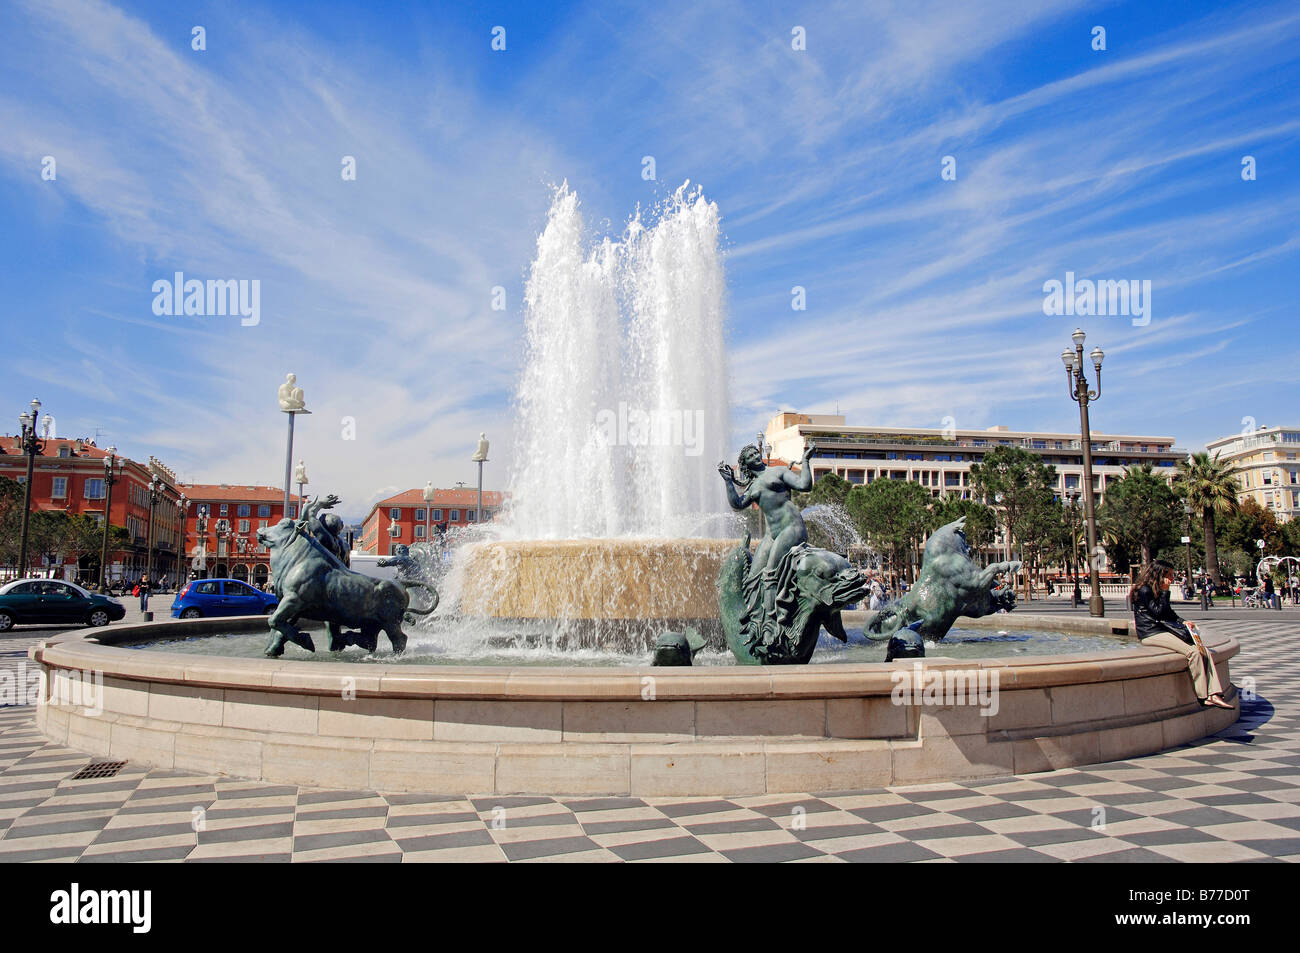 Fountain at Place Massena, Nice, Alpes-Maritimes, Provence-Alpes-Cote d'Azur, Southern France, France, Europe Stock Photo